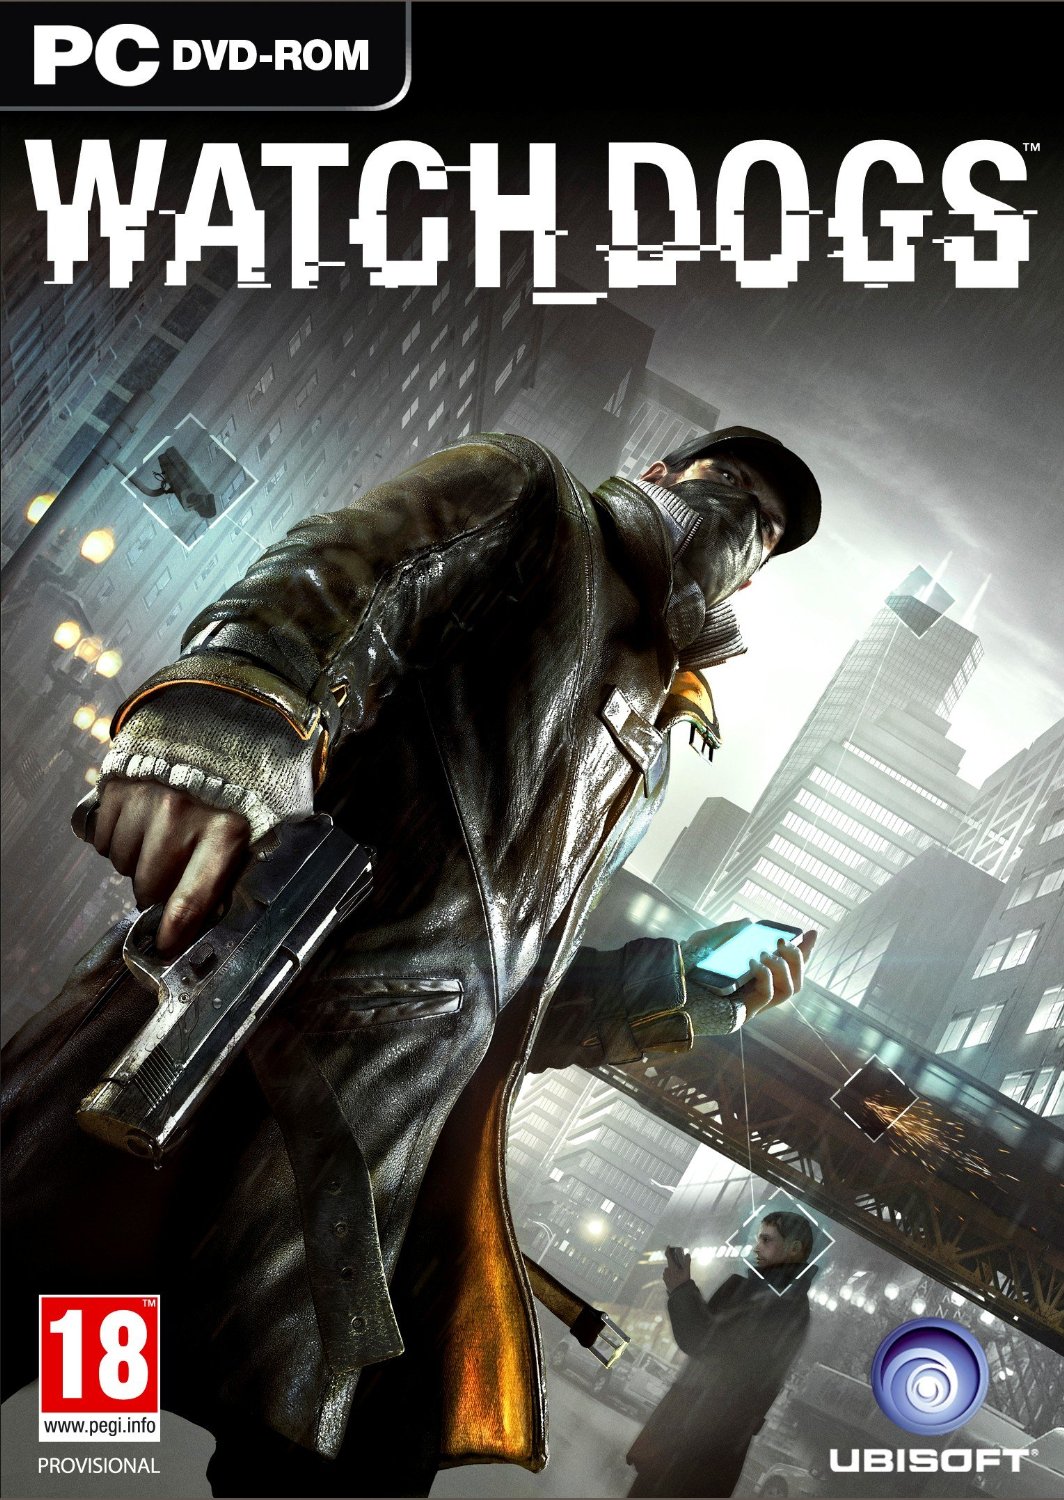 Watch Dogs Deluxe Edition CD Key for Uplay